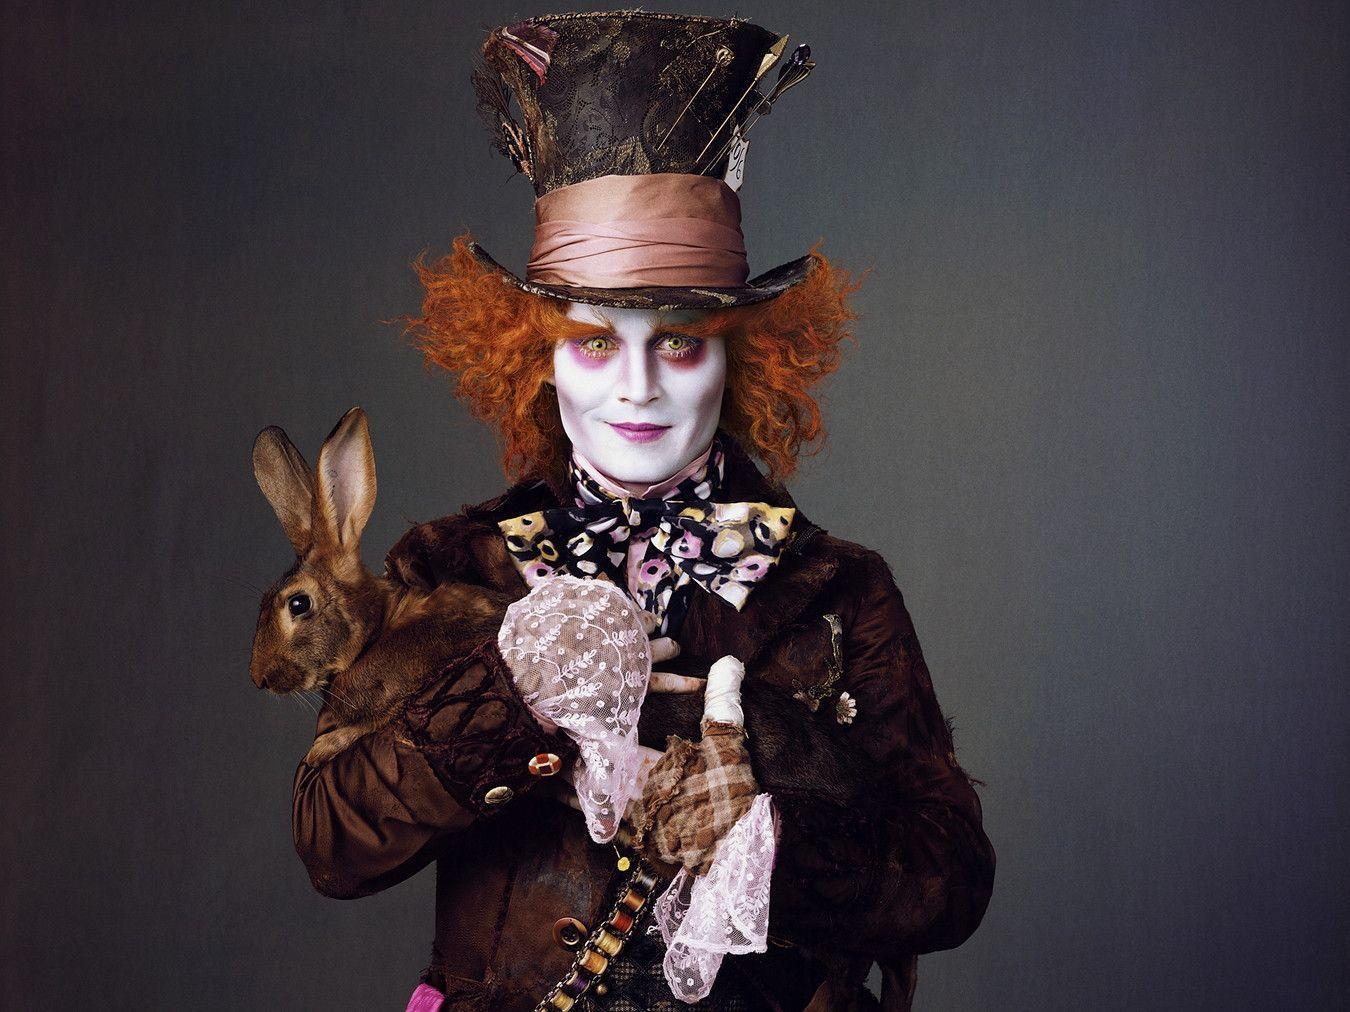 Free The Mad Hatter Wallpaper, Free The Mad Hatter HD Wallpaper